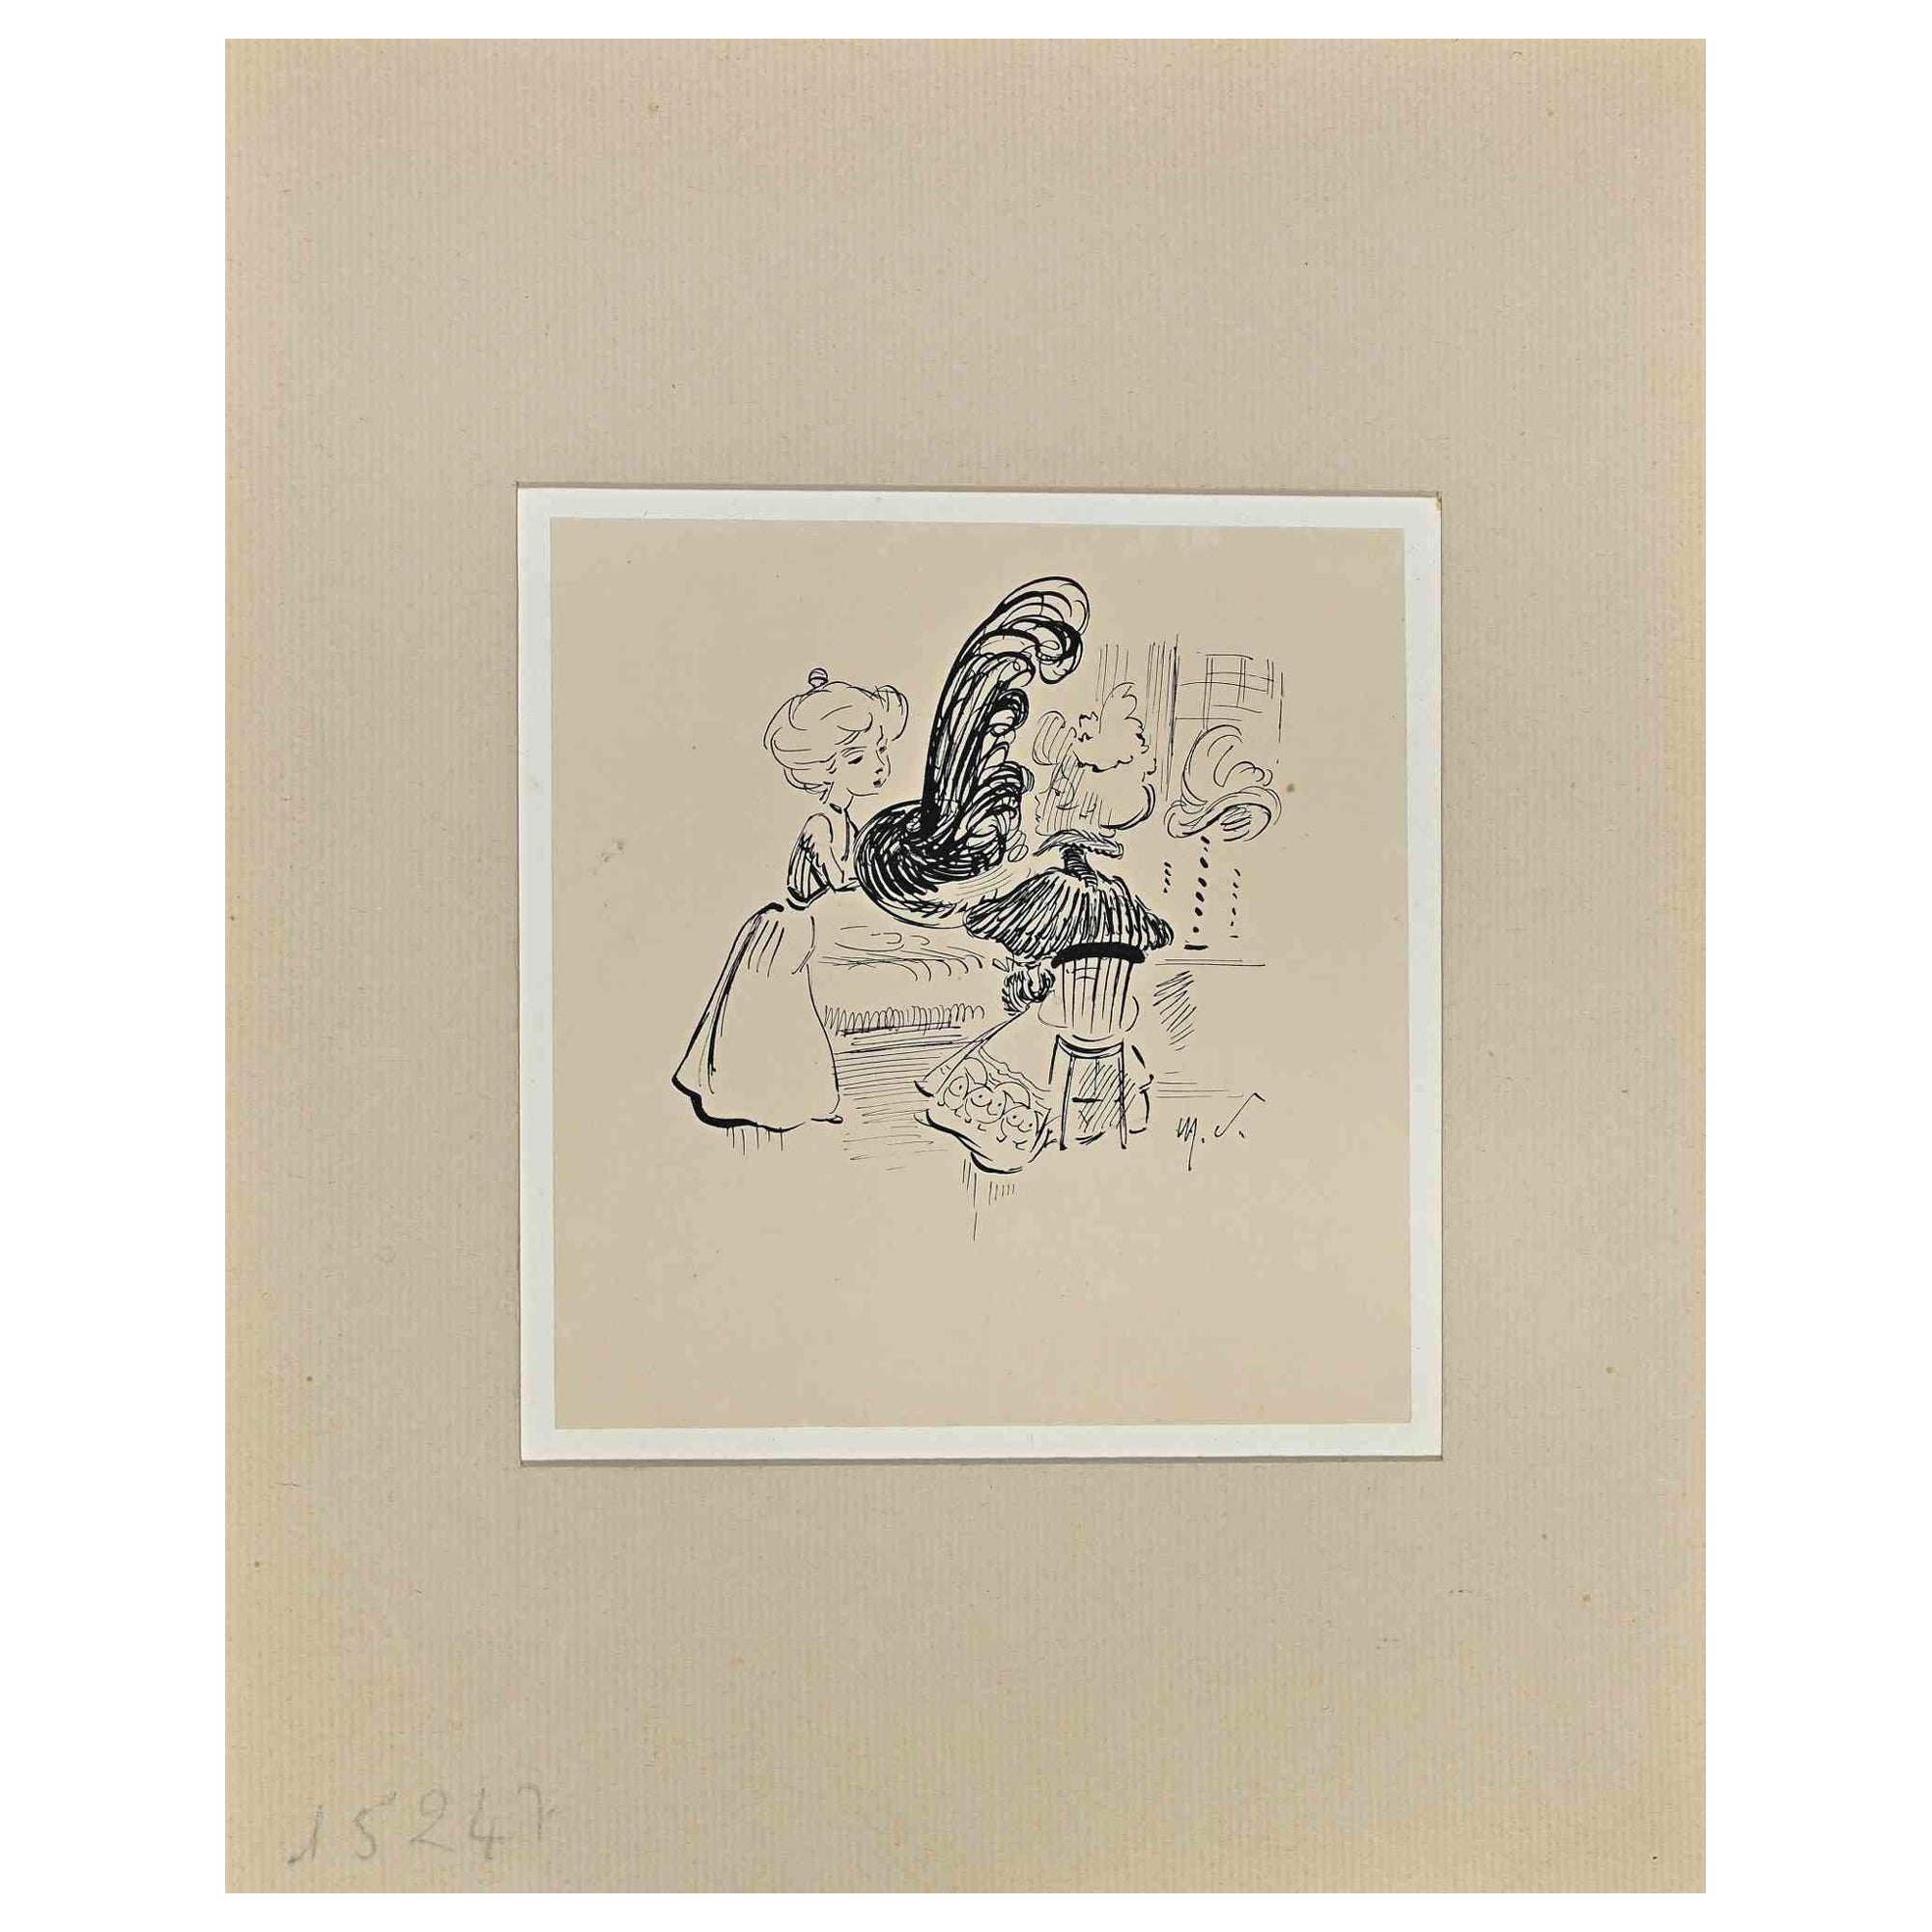 Henry Somm Figurative Art - Seller of Hats - Original Ink Drawing on Paper by H. Somm - Late 19th Century